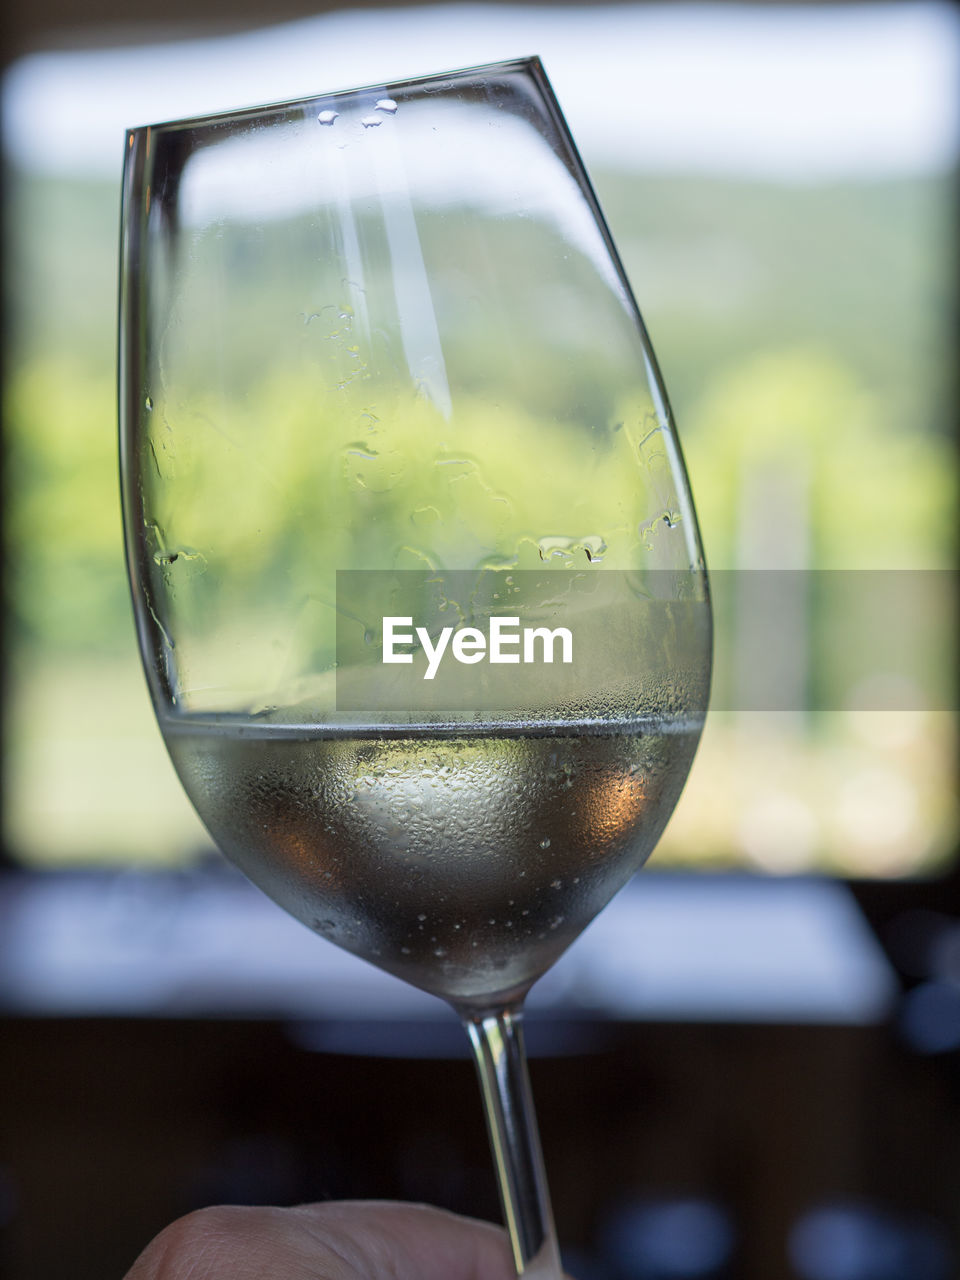 CLOSE-UP OF GLASS OF WINE